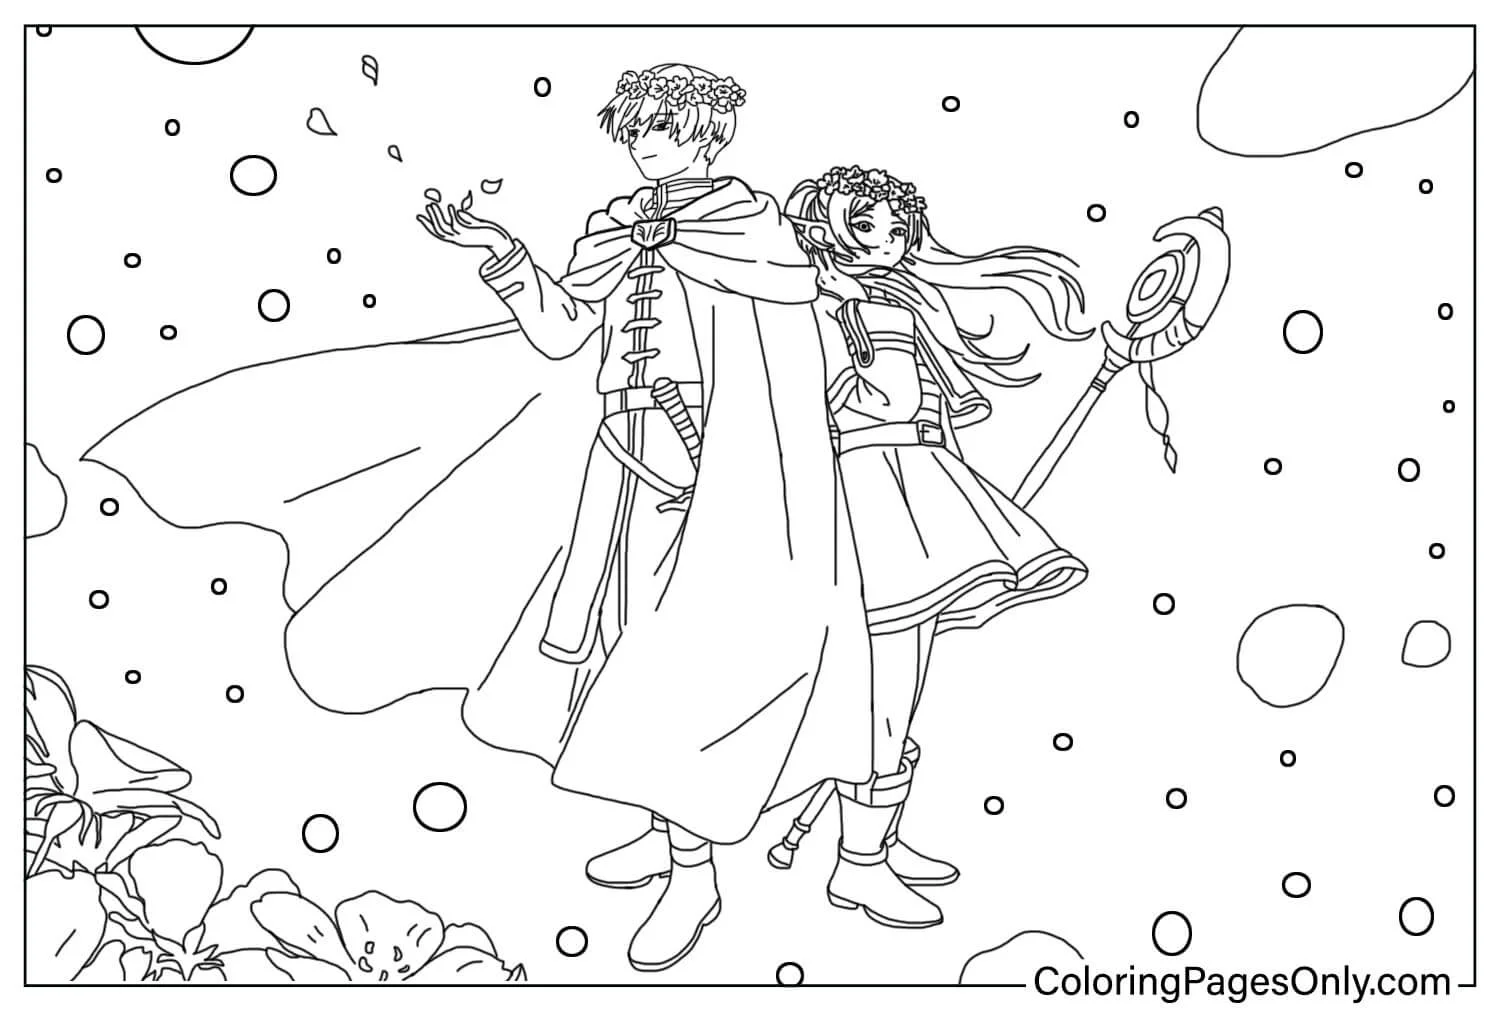 Frieren and Himmel Coloring Page from Frieren: Beyond Journey’s End